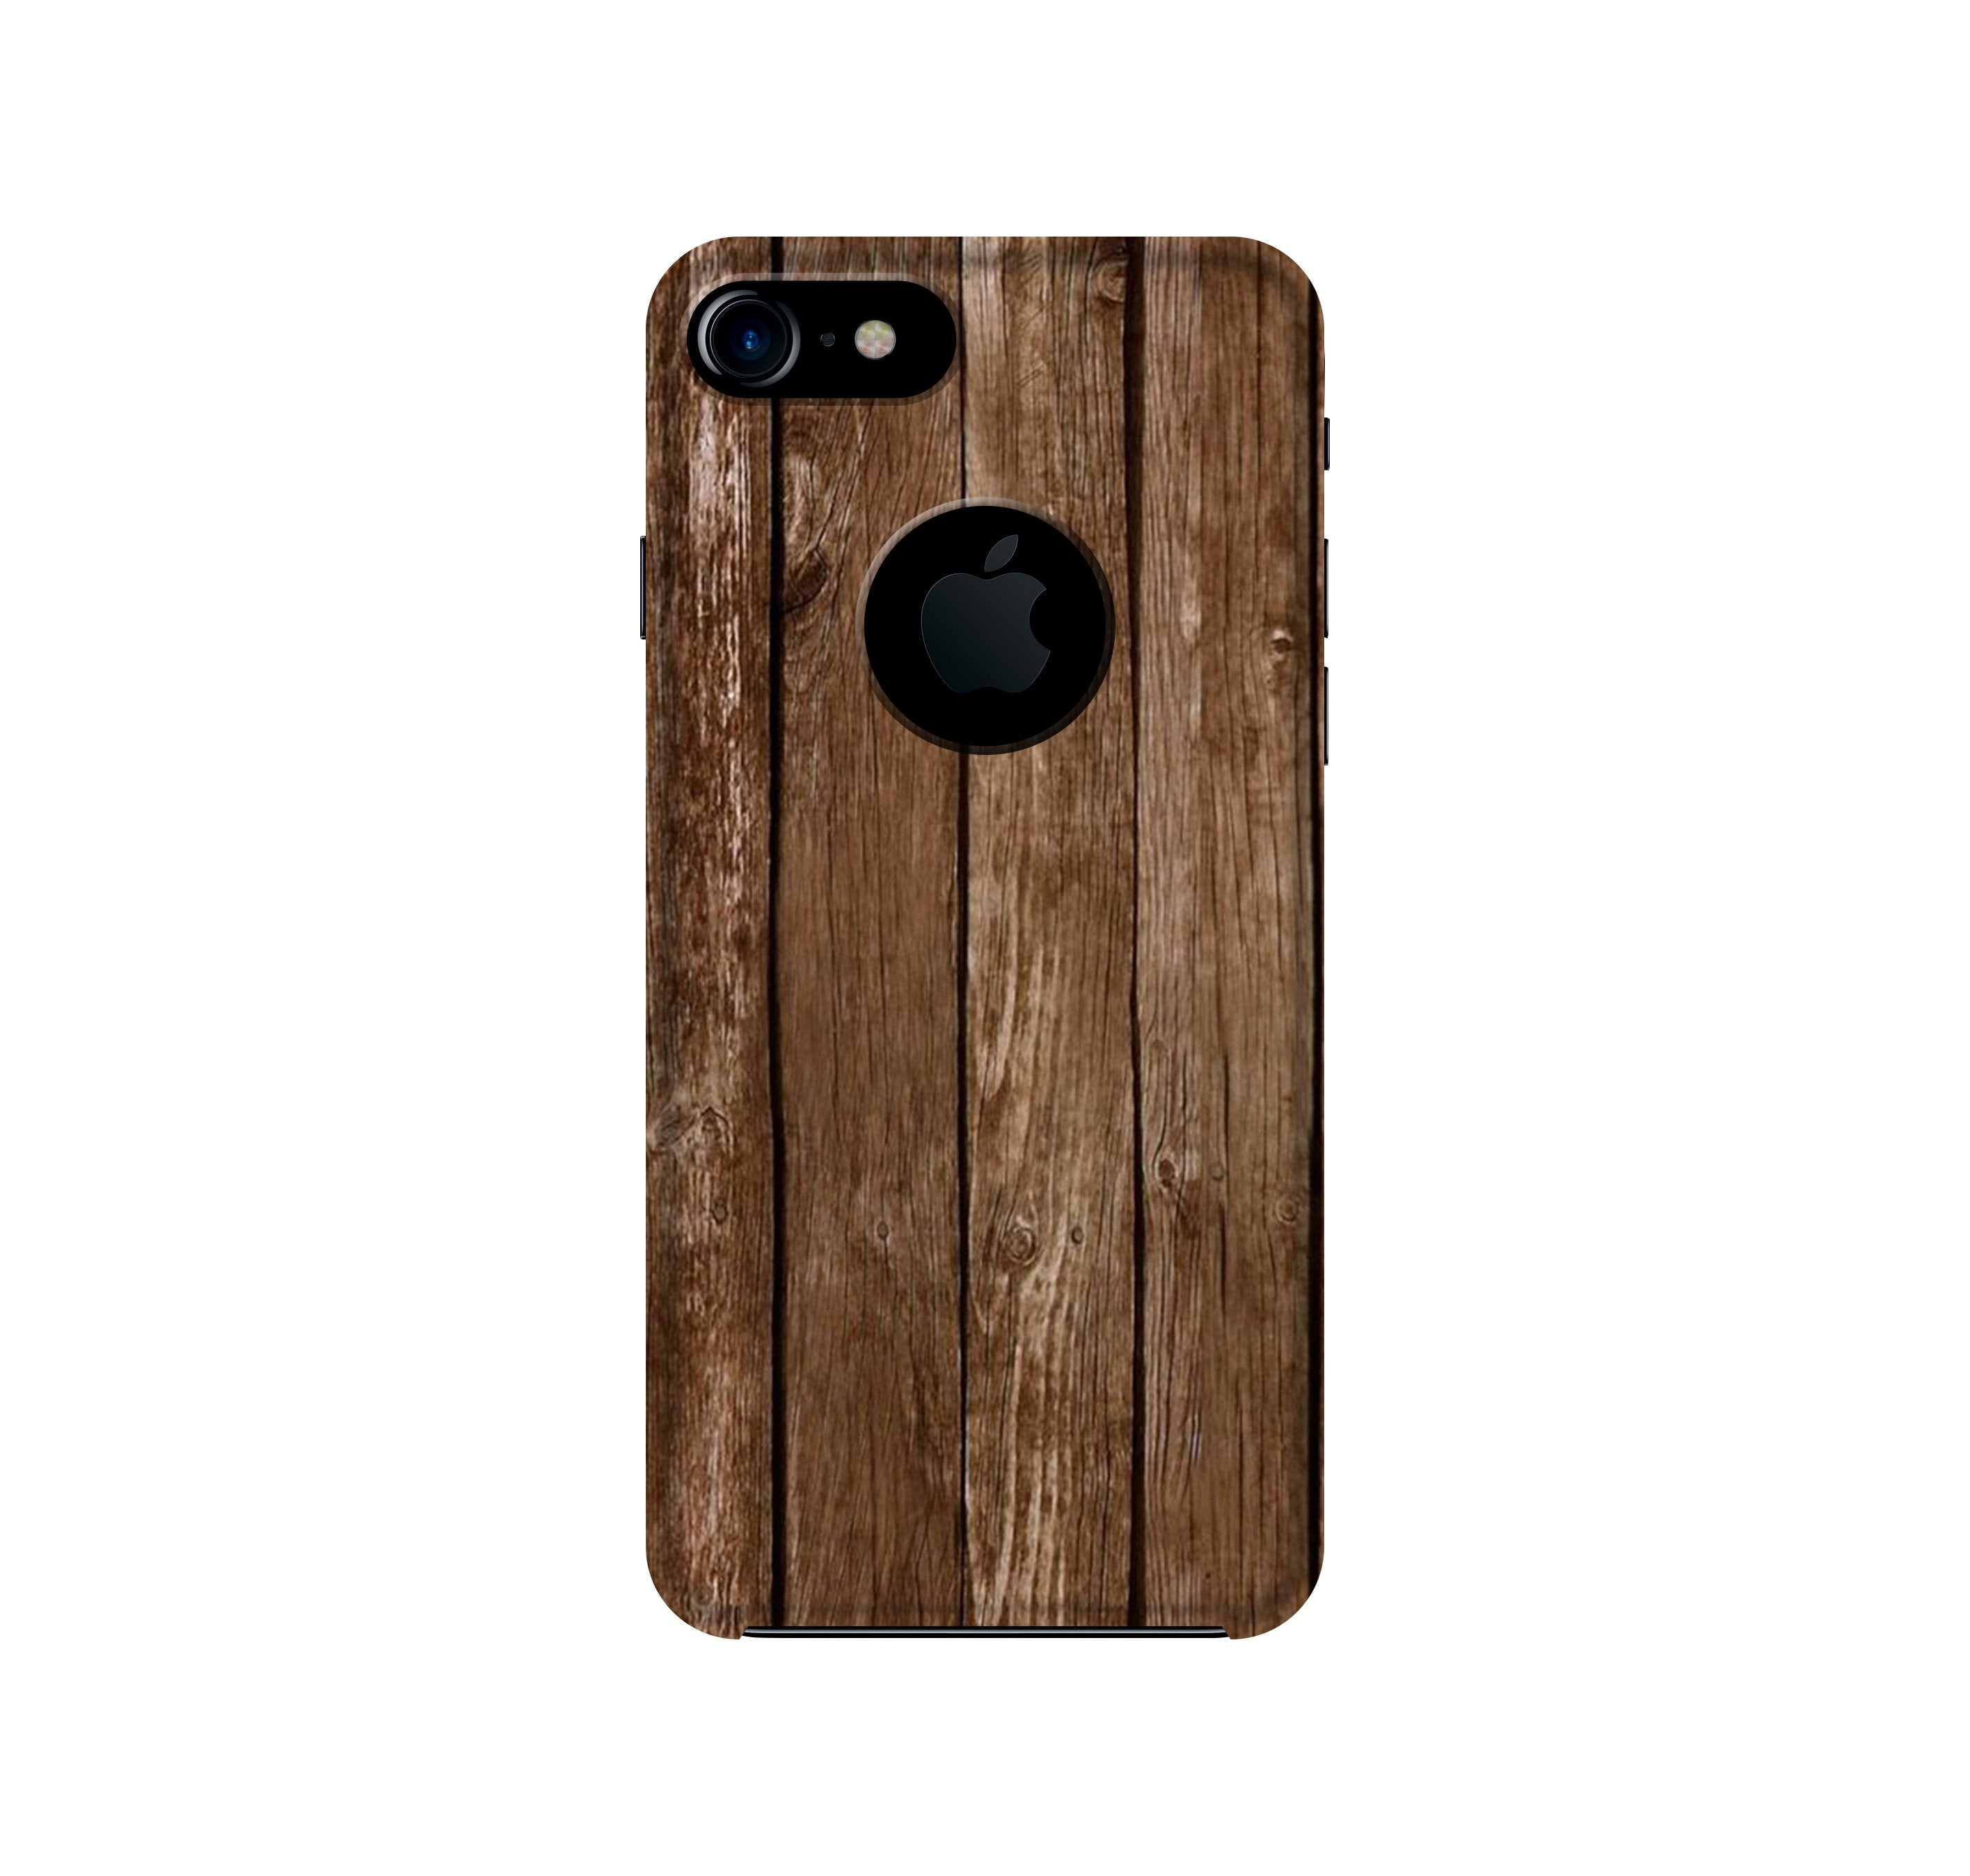 Wooden Look Case for iPhone 7 logo cut  (Design - 112)